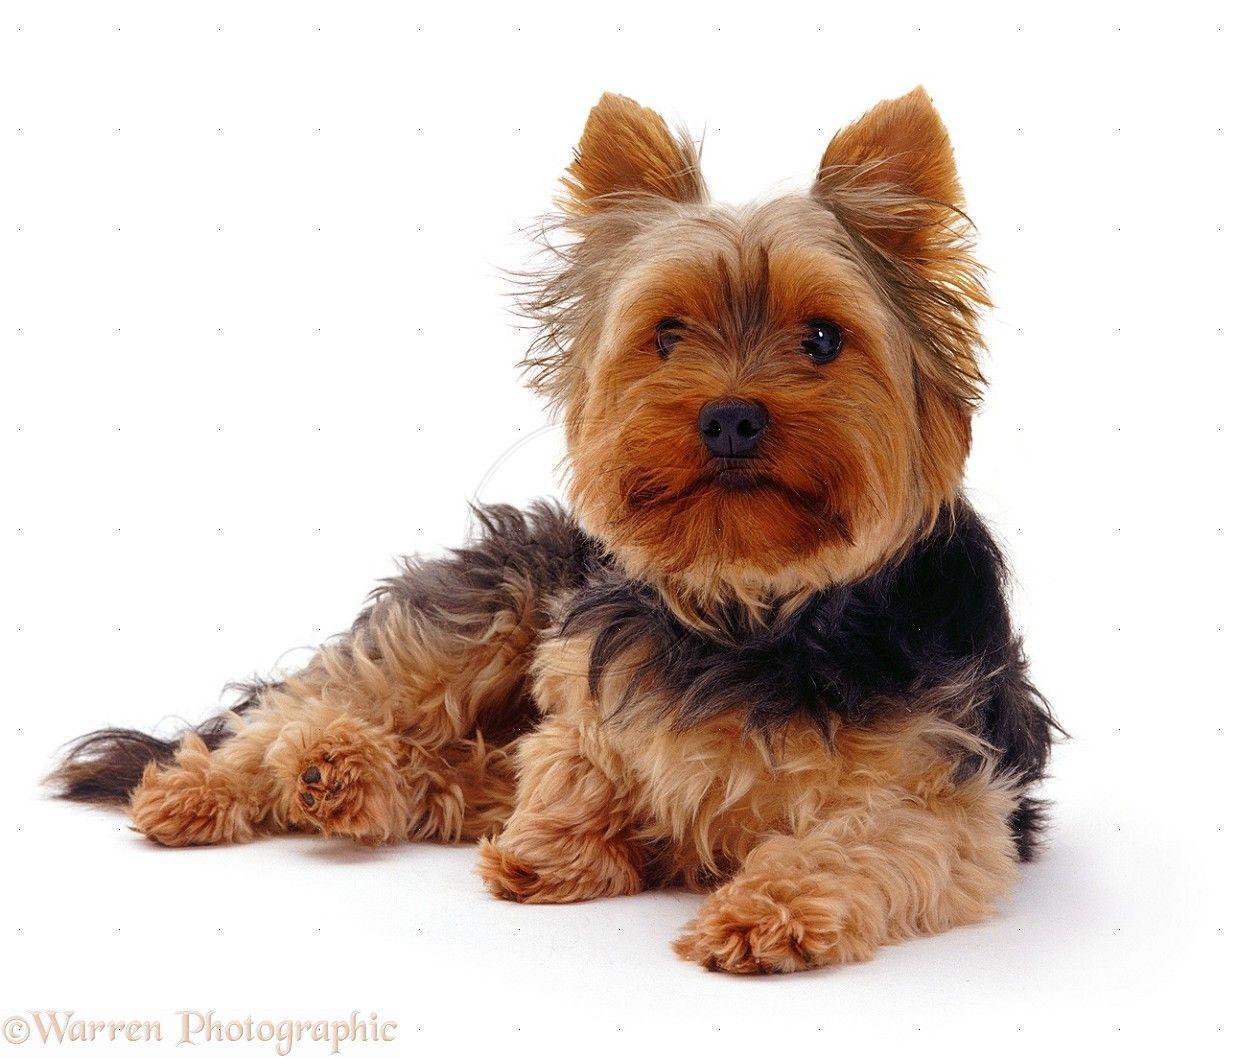 Yorkshire Terrier Image & Wallpaper on Jeweell